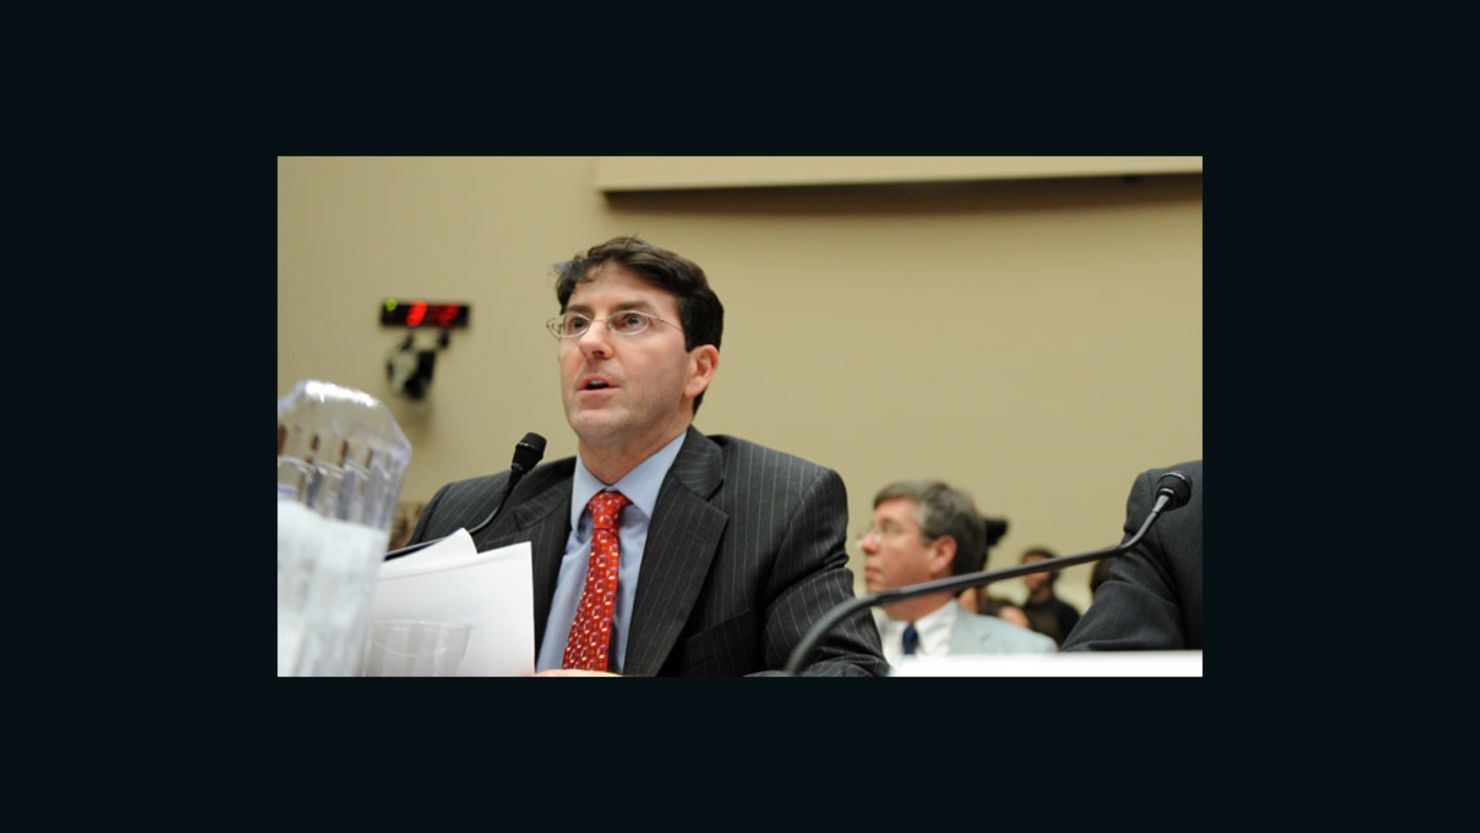 Auto safety advocate Sean Kane testifies in 2010 on reports of sudden unintended acceleration in Toyota vehicles.